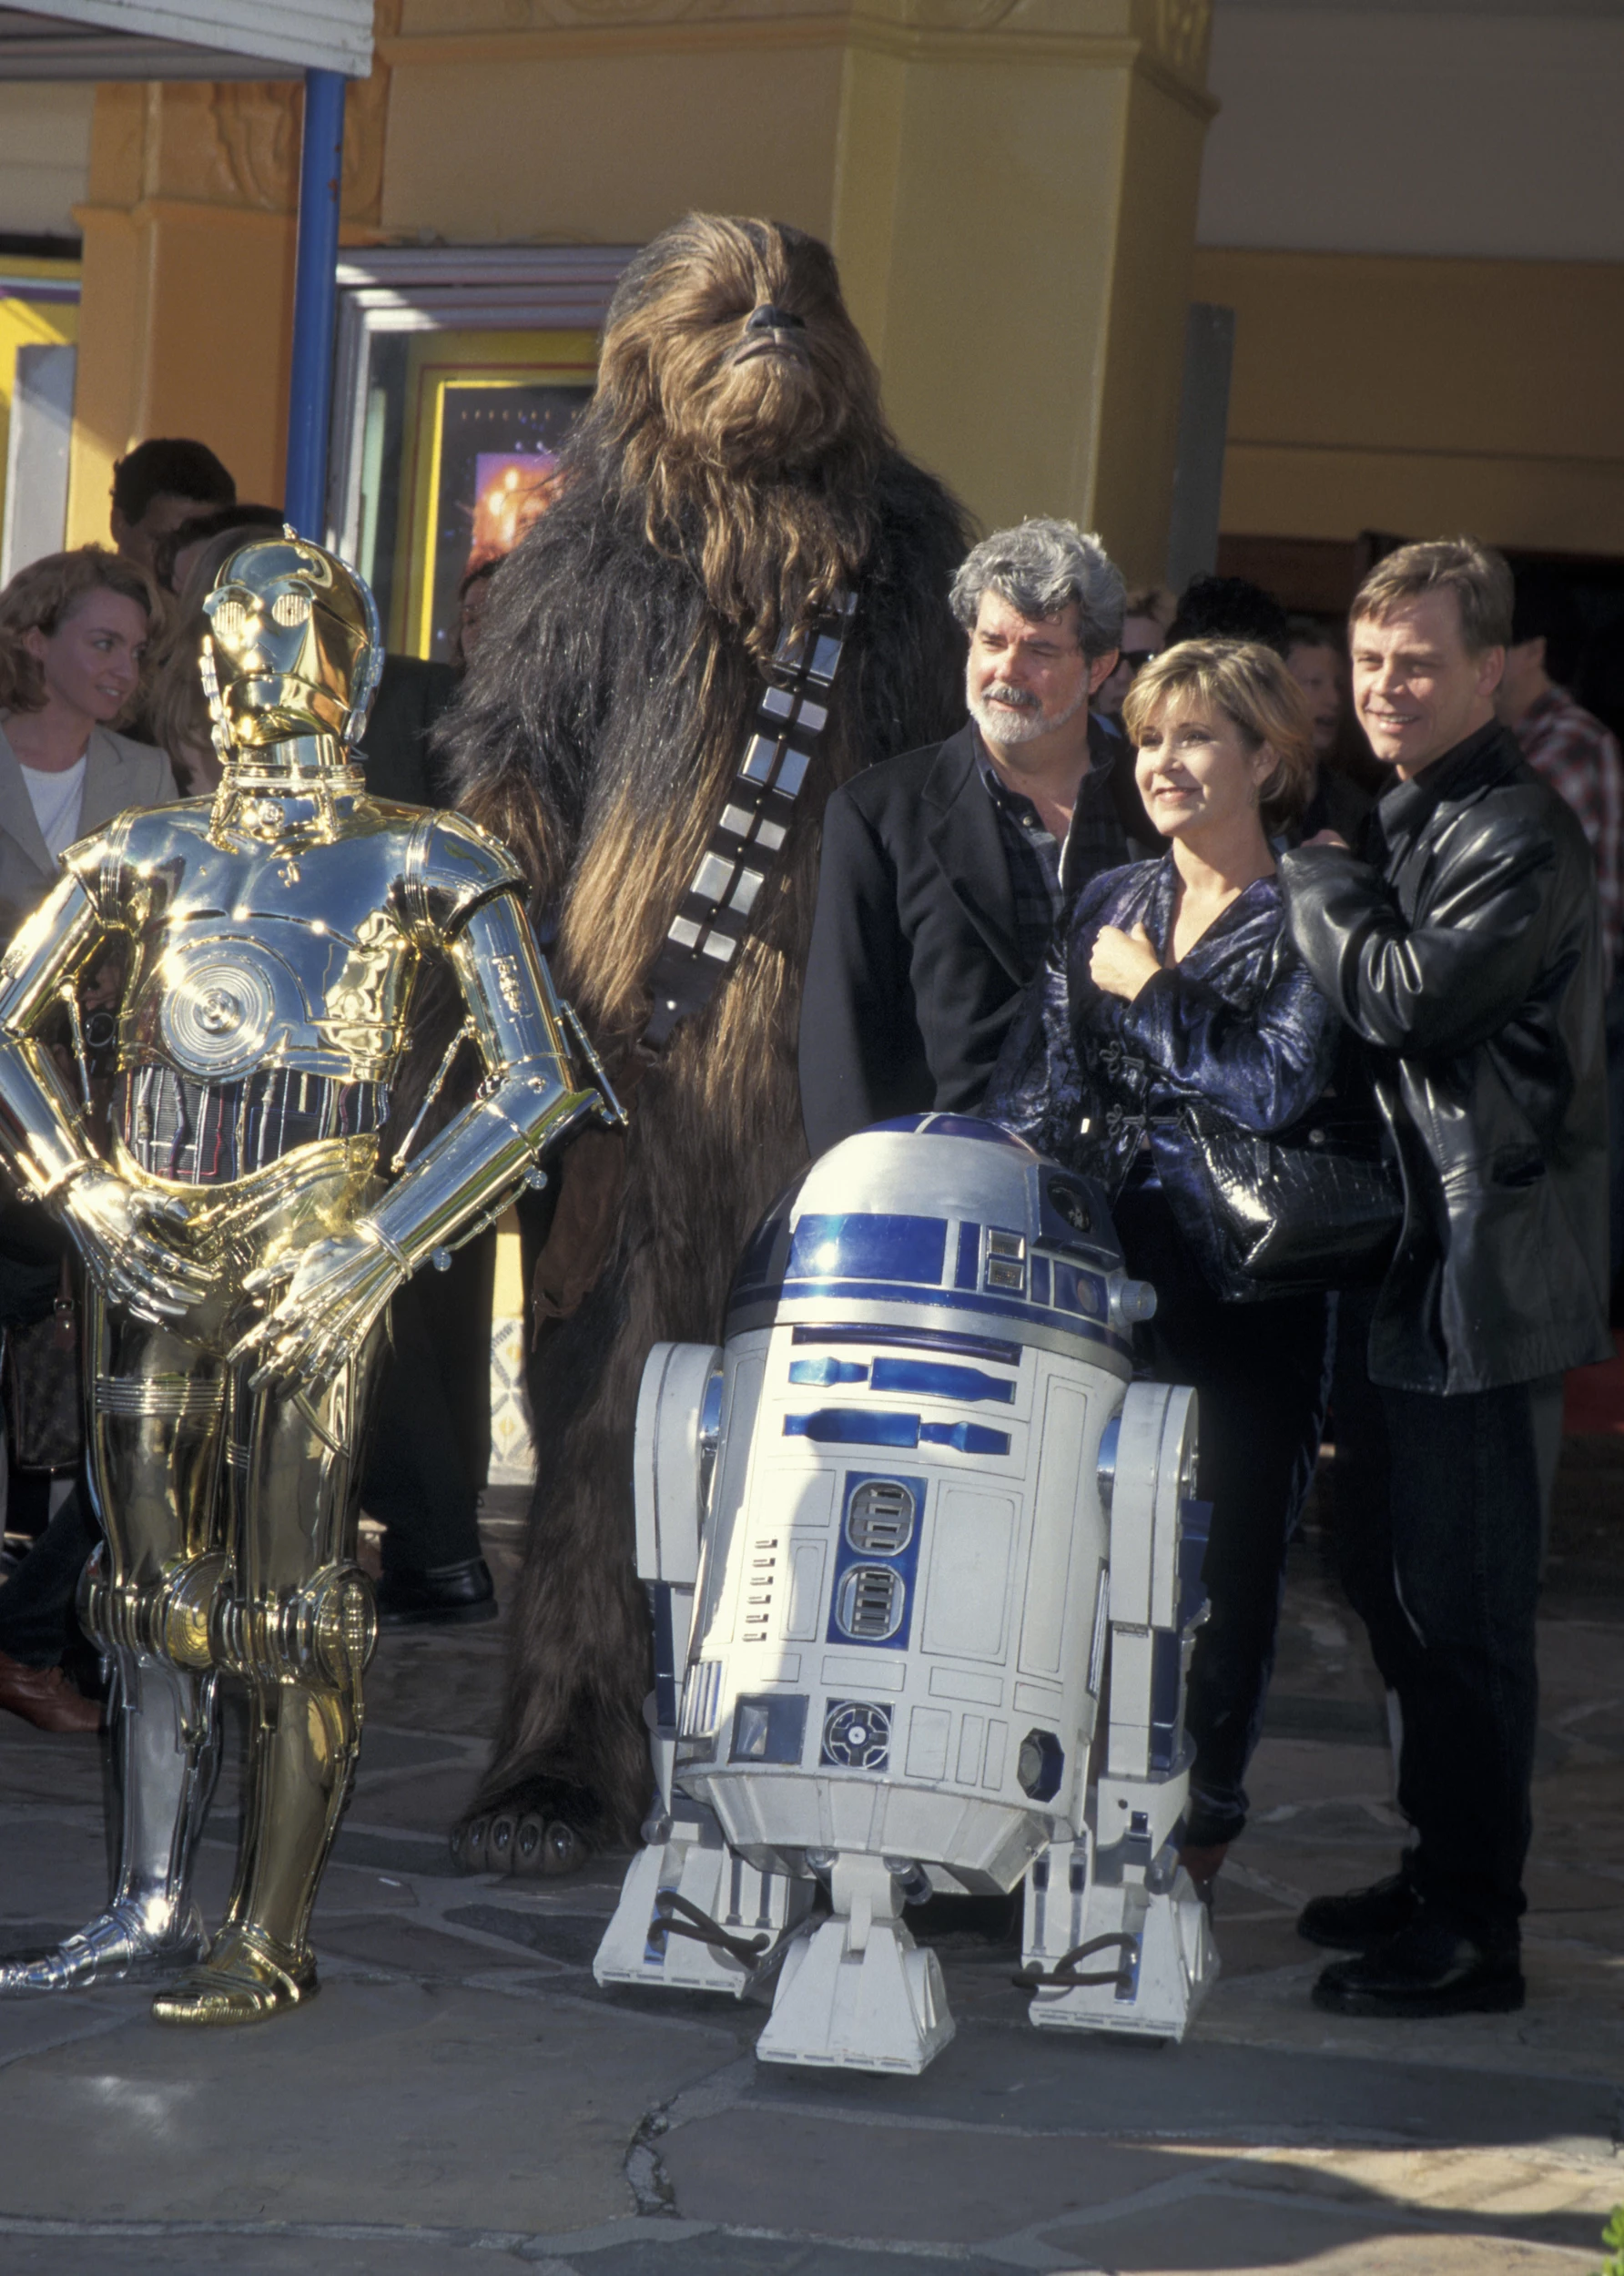 Premiere of "Star Wars Special Edition"